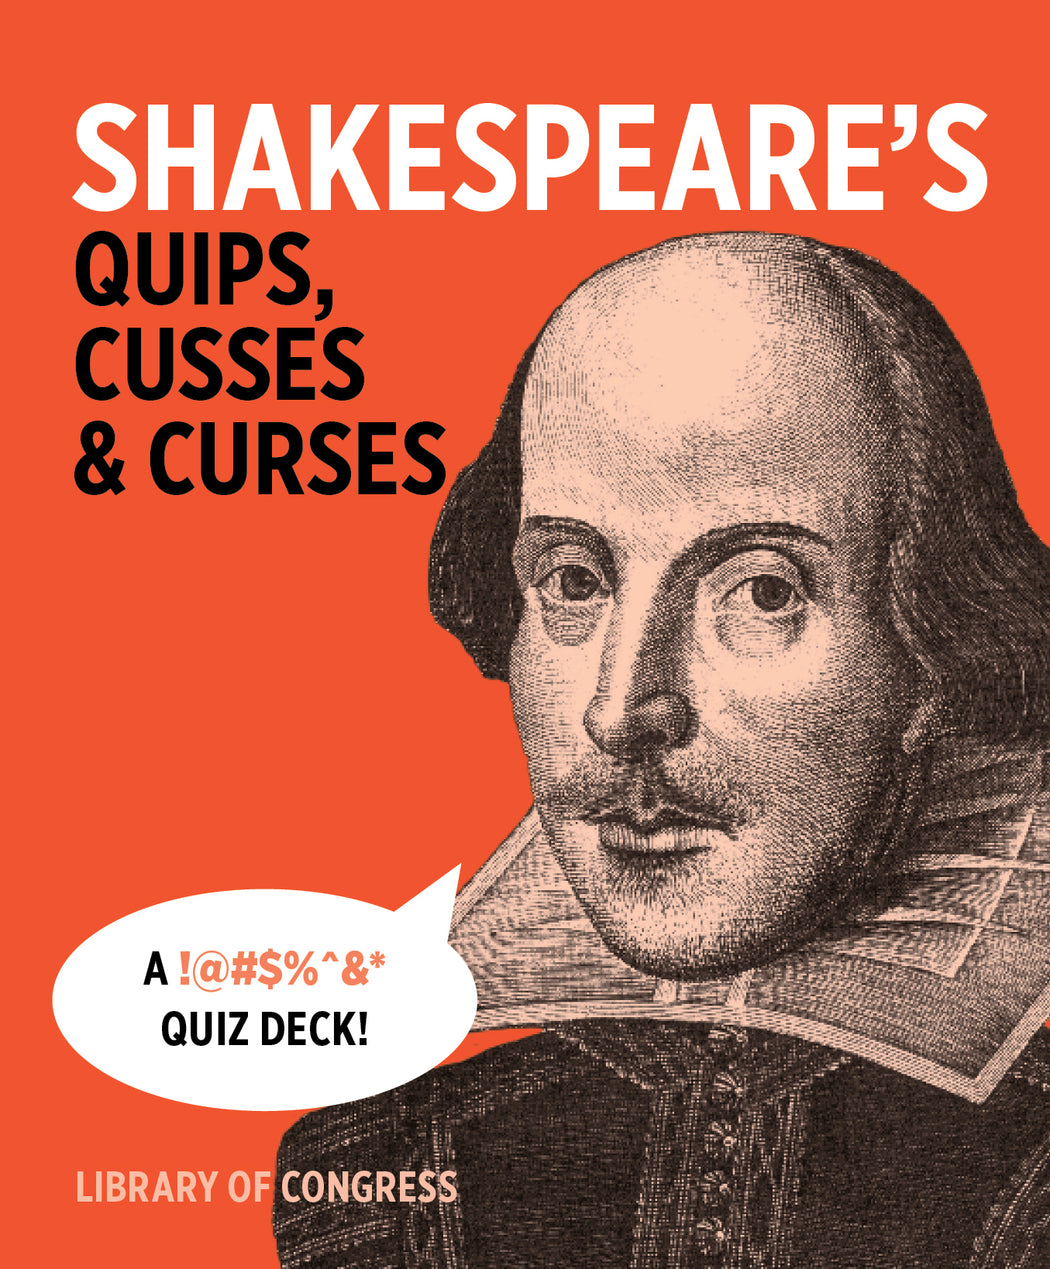 Shakespeare’s Quips, Cusses & Curses Knowledge Cards_Zoom